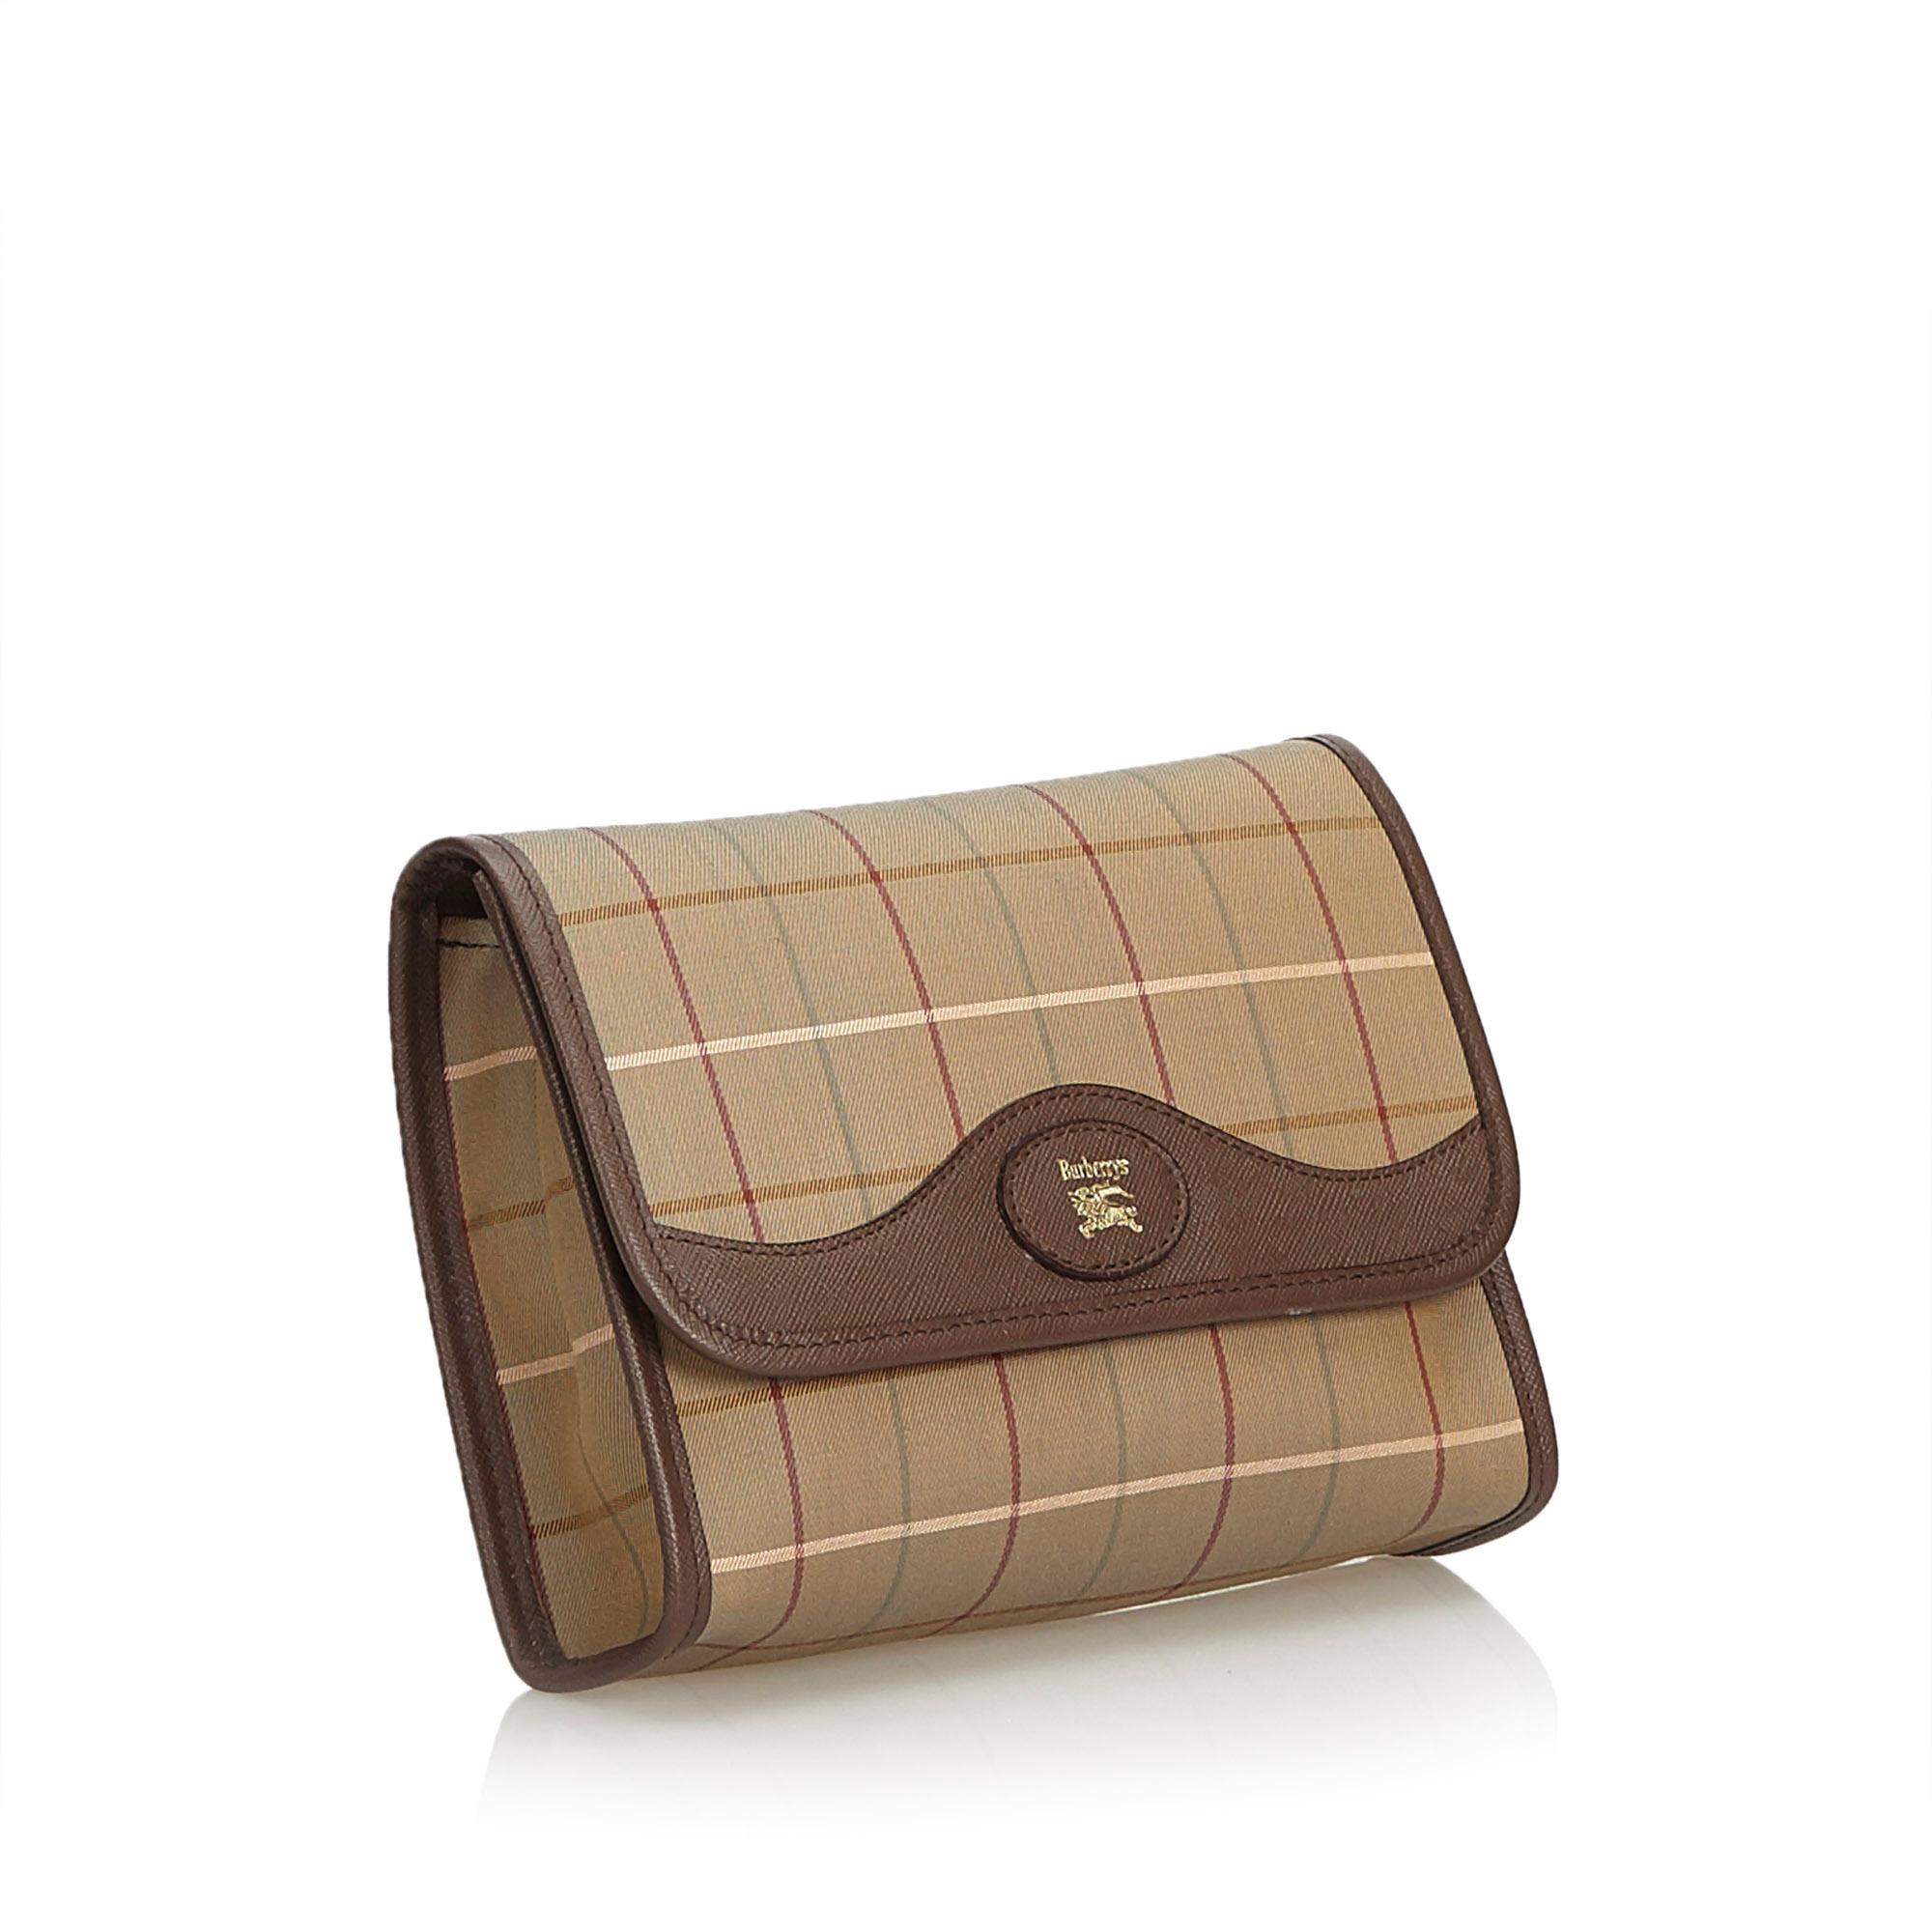 This clutch bag features a plaid jacquard body with leather trim, and a front flap with a magnetic snap button closure. It carries as B+ condition rating.

Inclusions: 
Box

Dimensions:
Length: 15.00 cm
Width: 20.00 cm
Depth: 5.00 cm

Material: